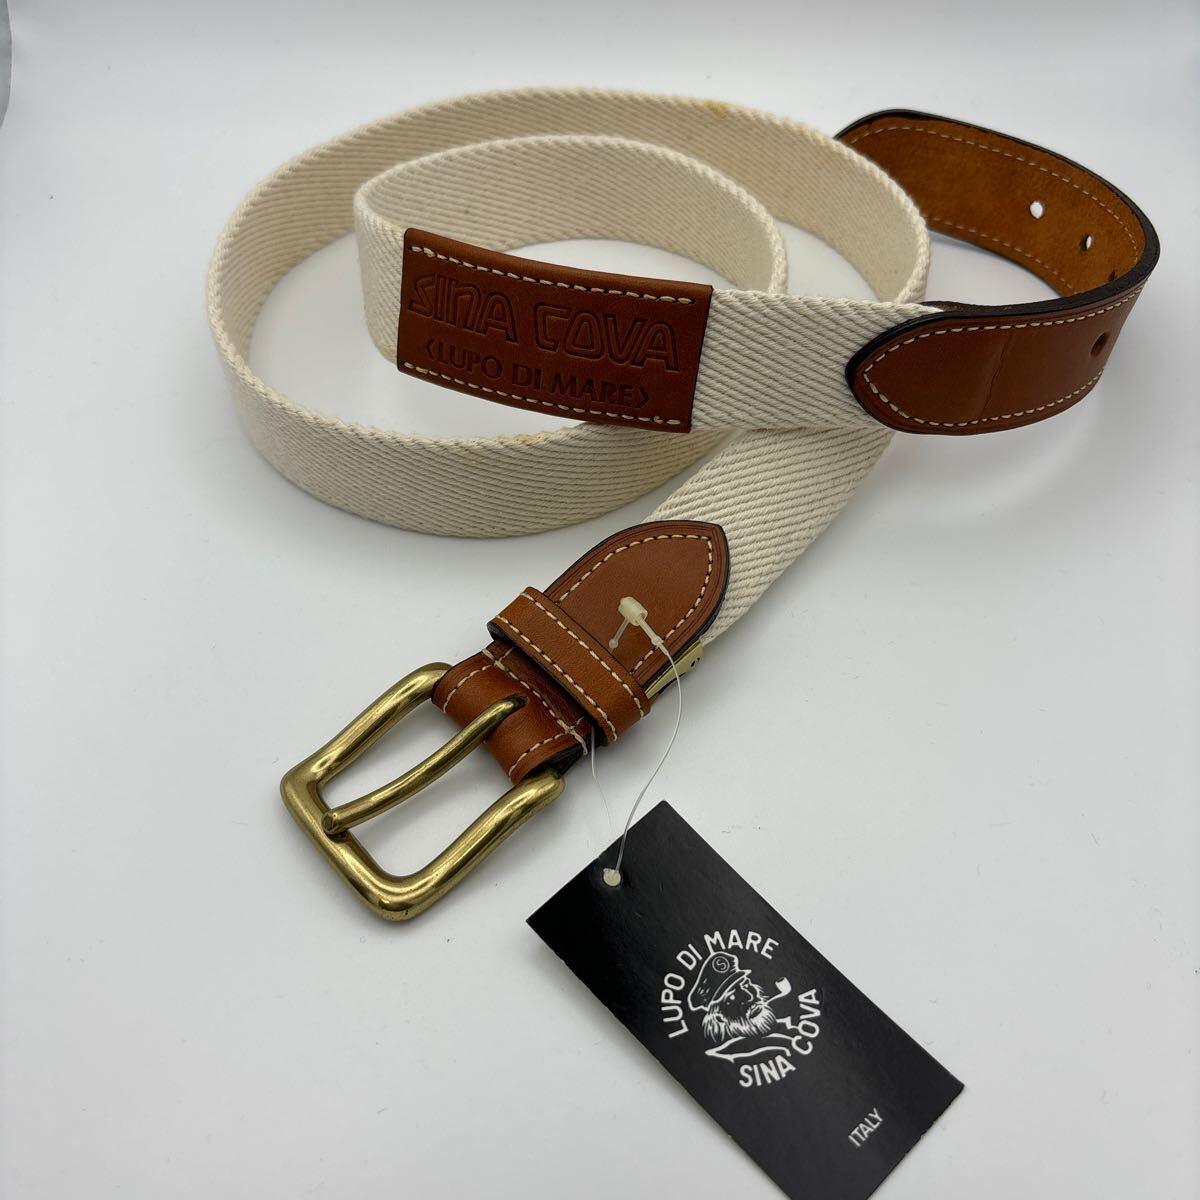  dead stock unused sinakobaSINA COVA leather original leather using belt . canvas Italy made Vintage ITALY tag attaching men's 